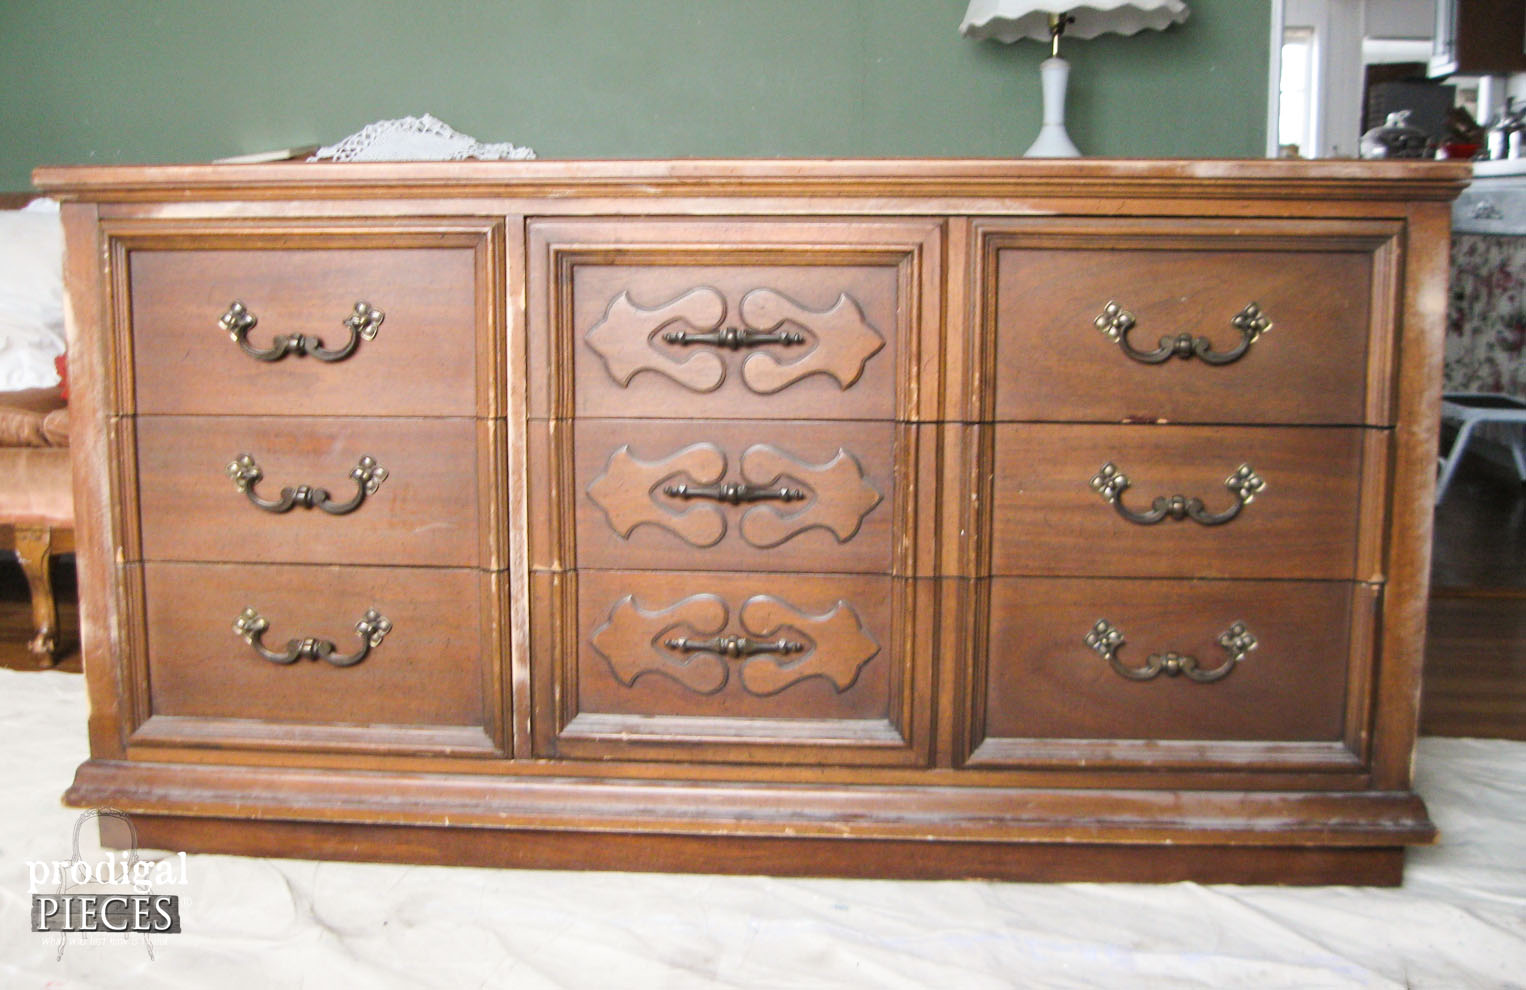 Updating and Outdated Dresser | Prodigal Pieces | www.prodigalpieces.com